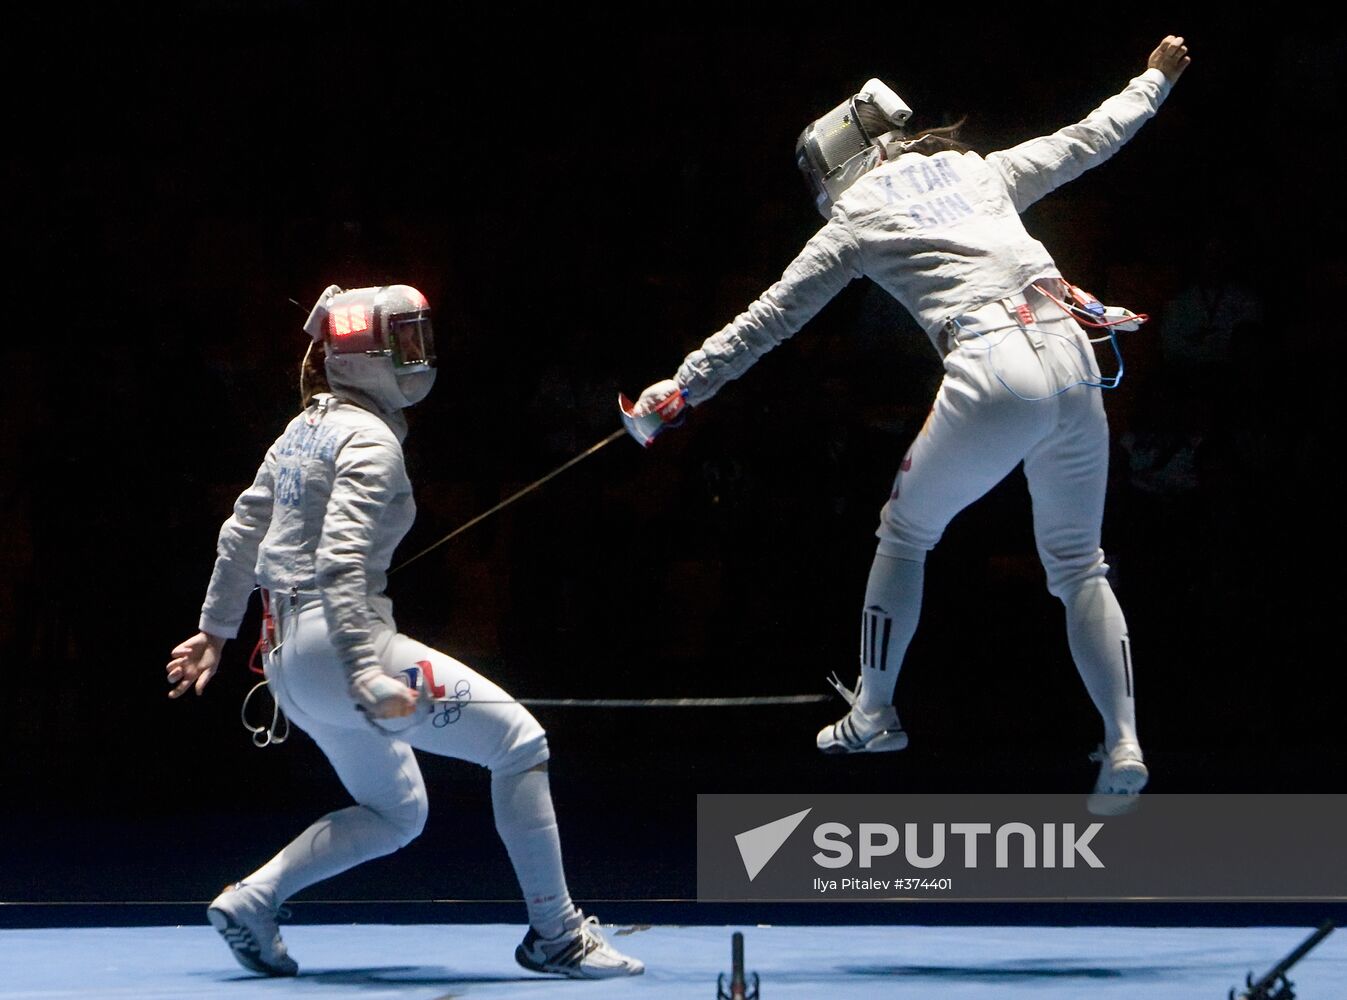 Moscow Saber 2009 international fencing tournament